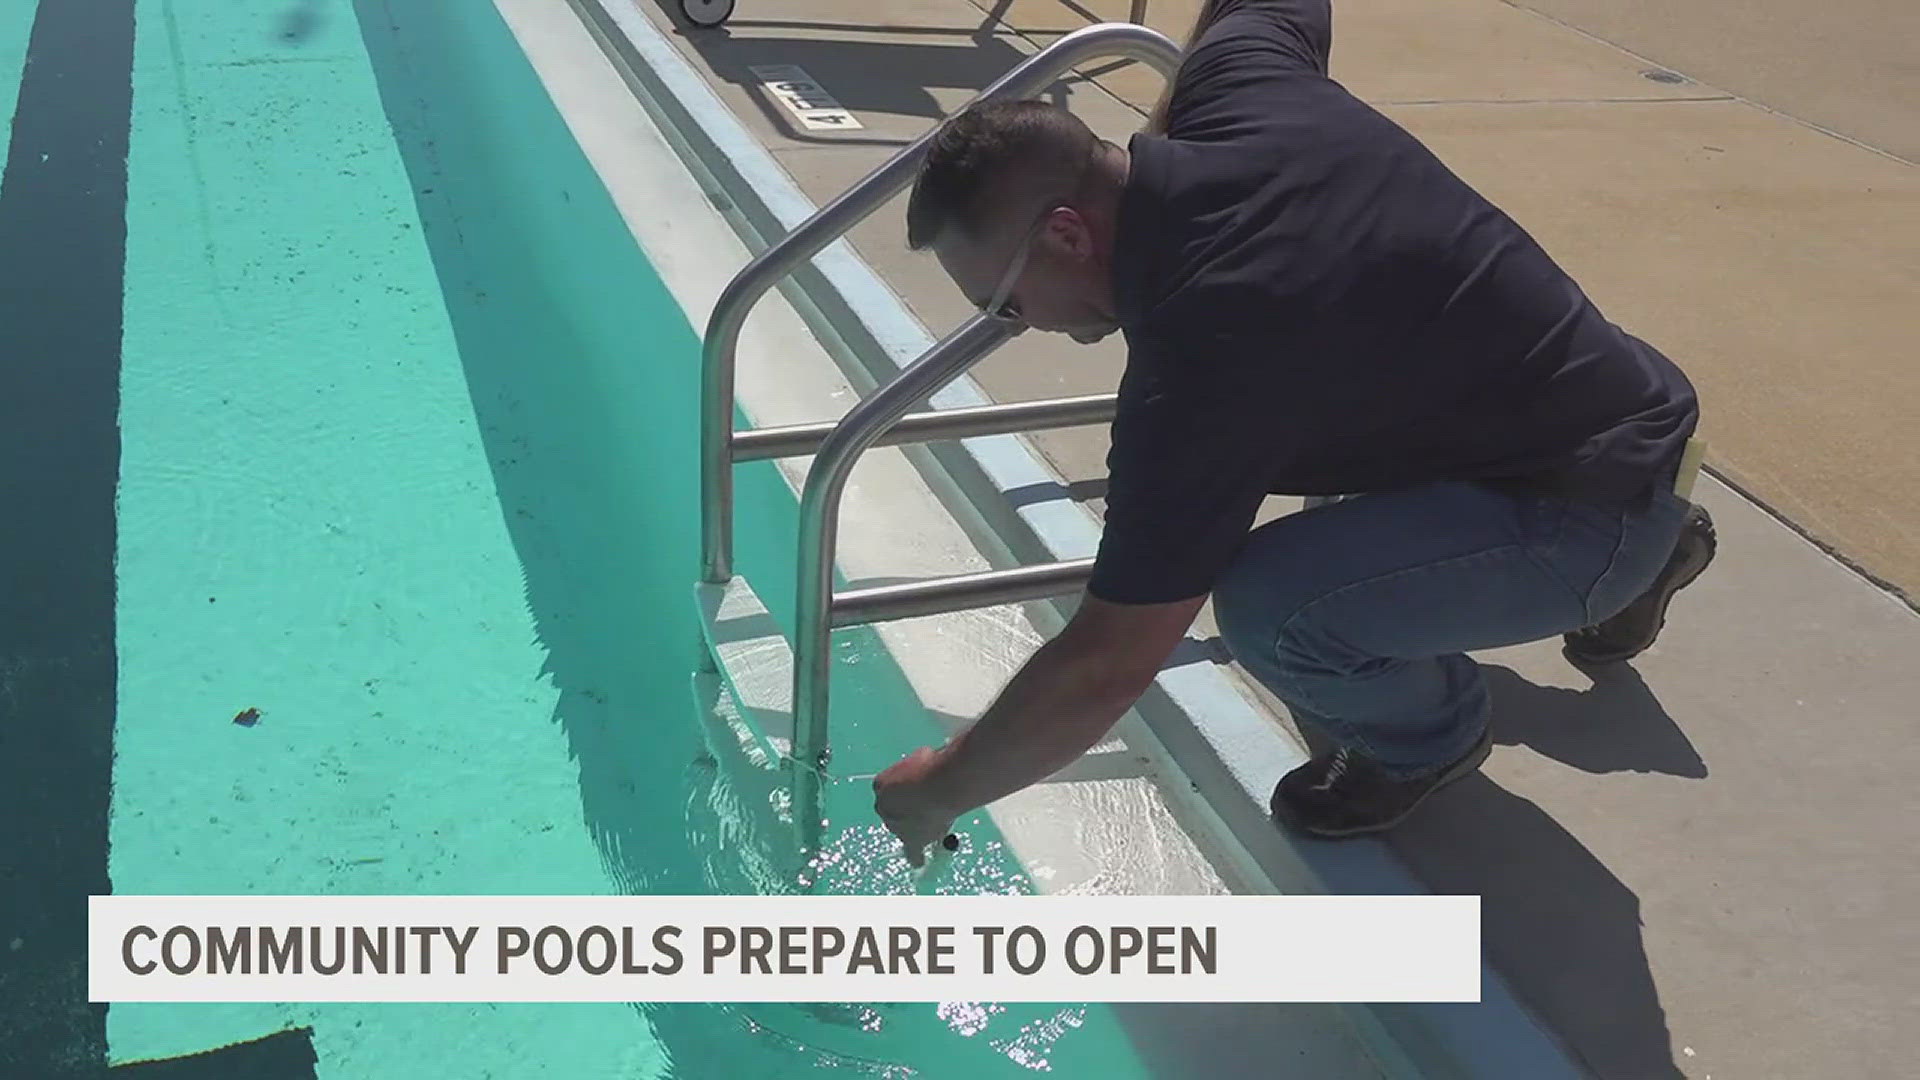 As the holiday weekend approaches, community pools across Central PA are getting ready to open for the summer season.